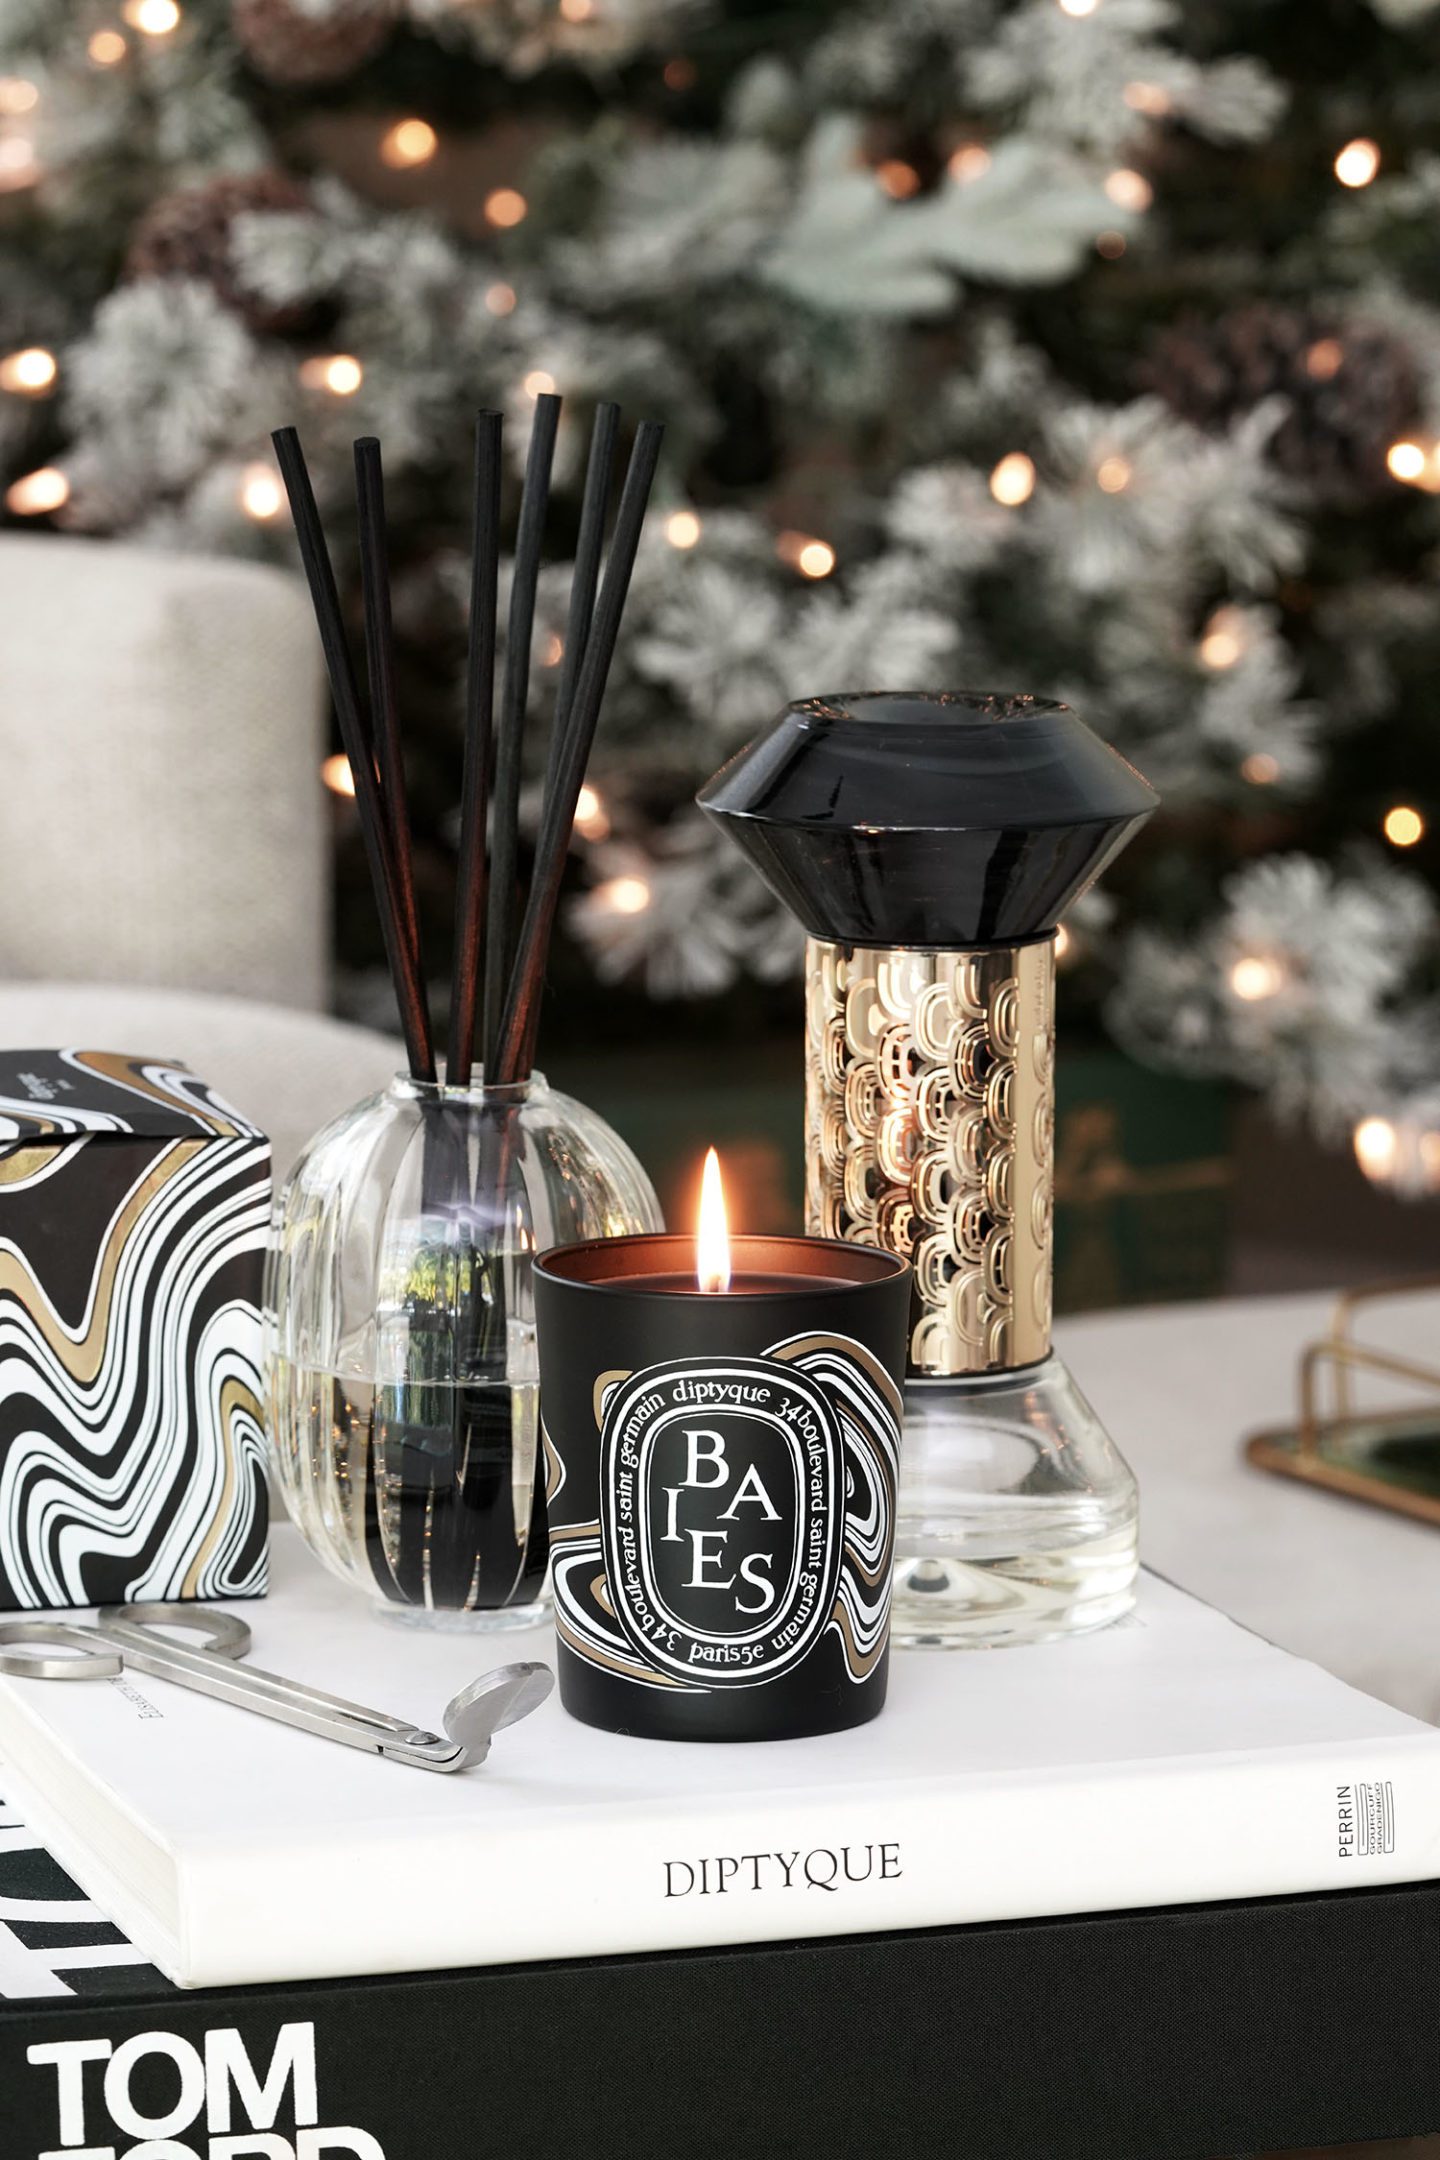 Diptyque Black Friday Baies Candle 2021 + Diffuser Review